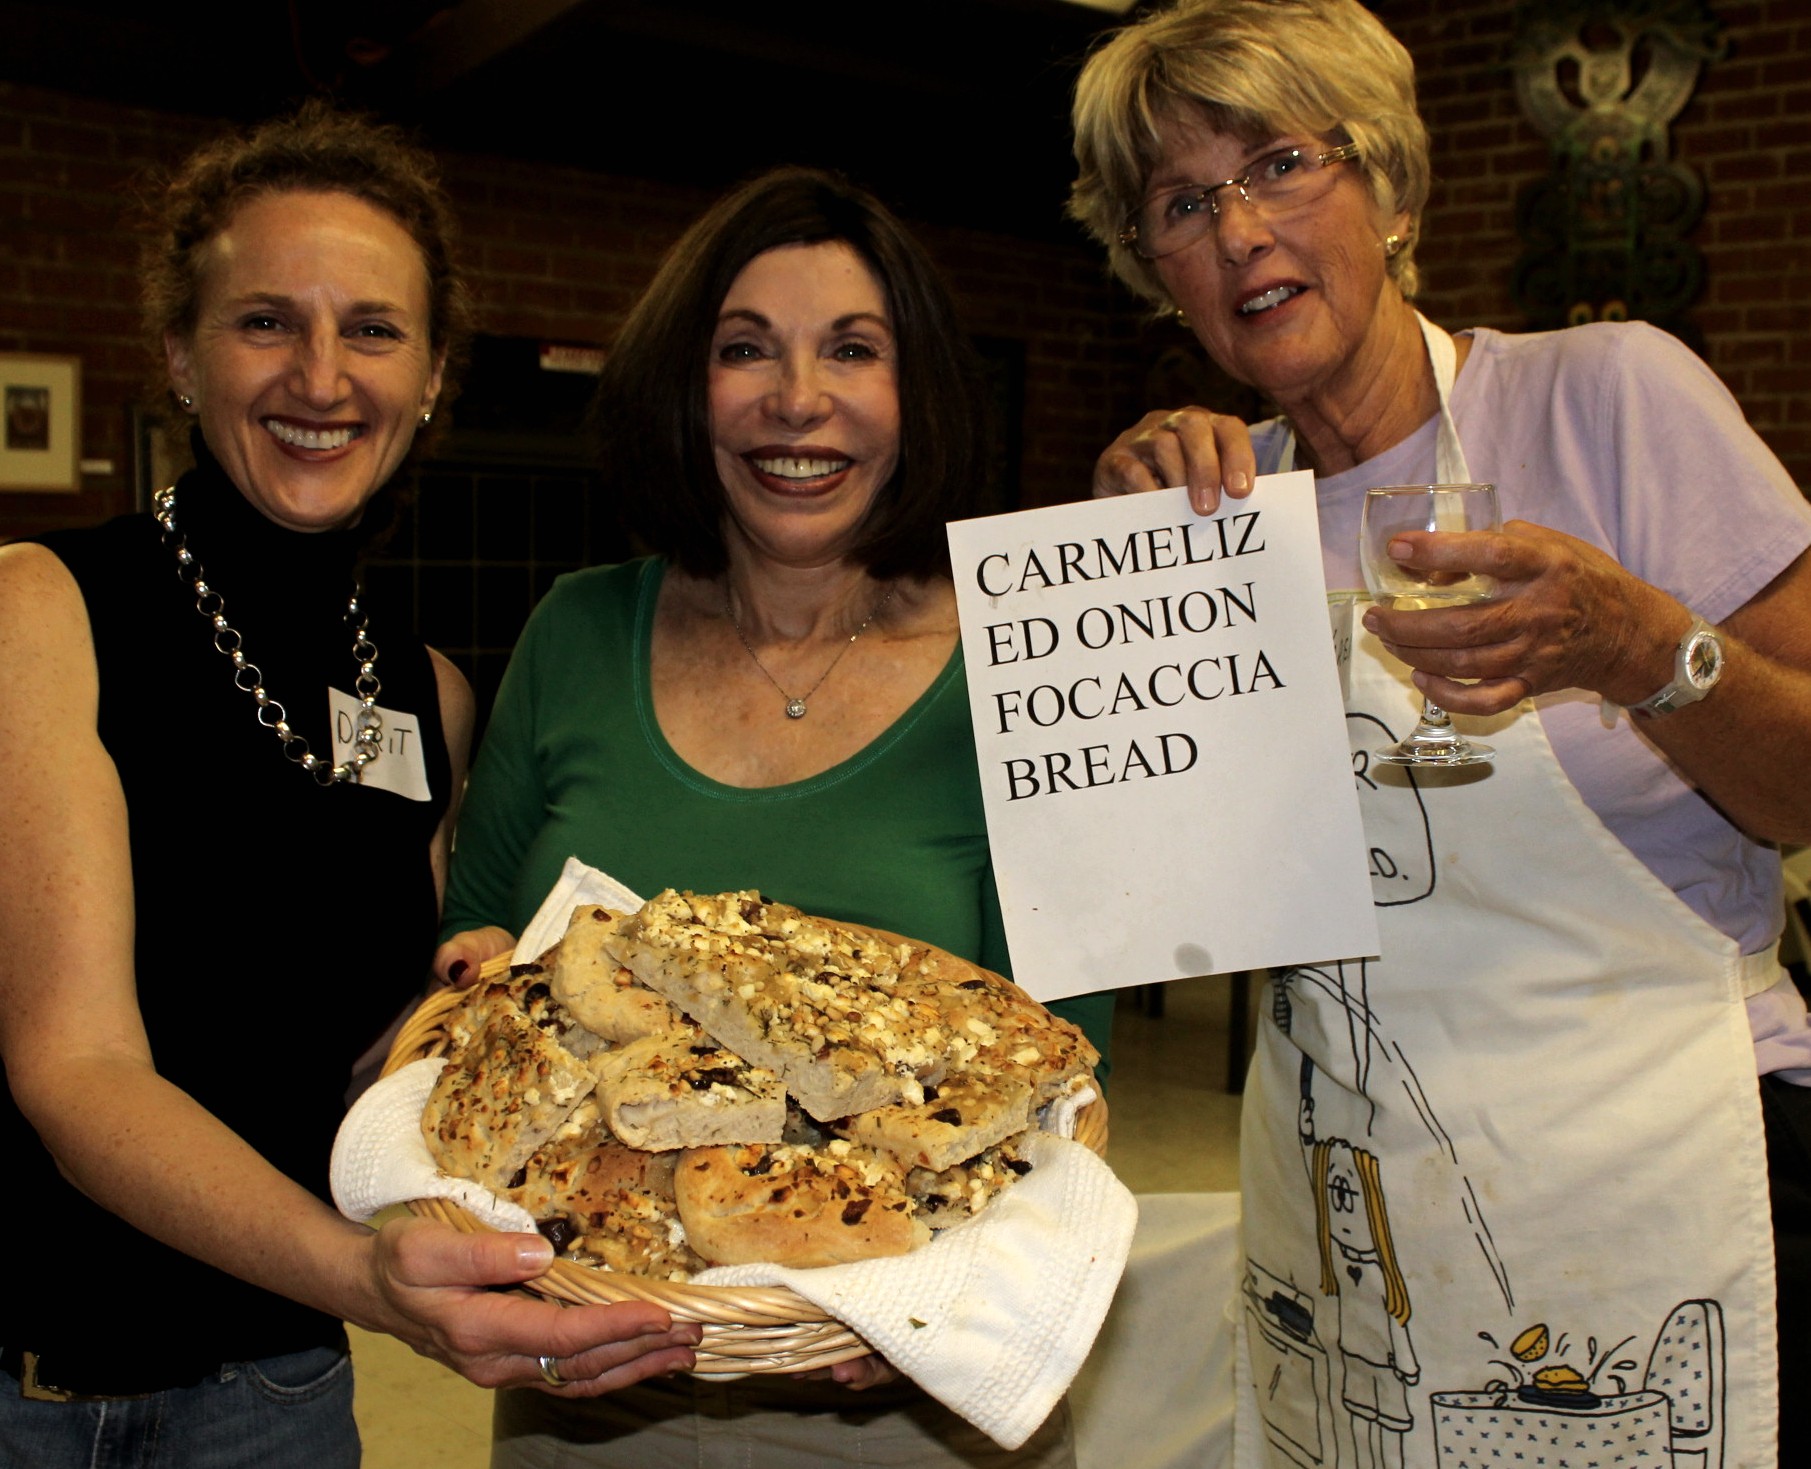 Dorit, Gerry and Karen with Caramelized Onion Focaccia Bread